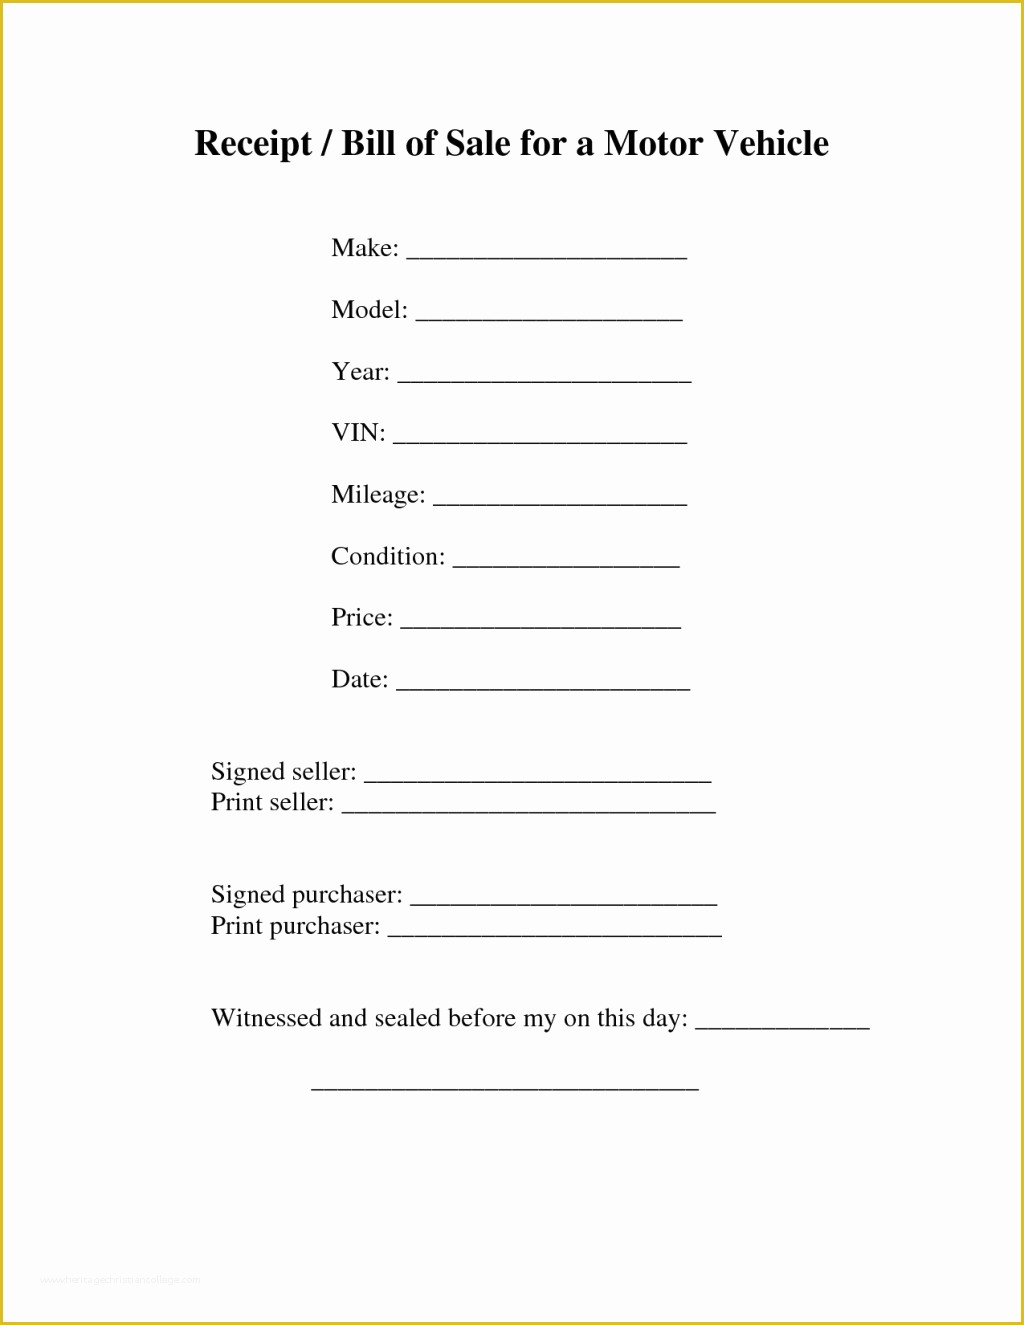 motorcycle-bill-of-sale-template-free-download-of-bill-sale-printable